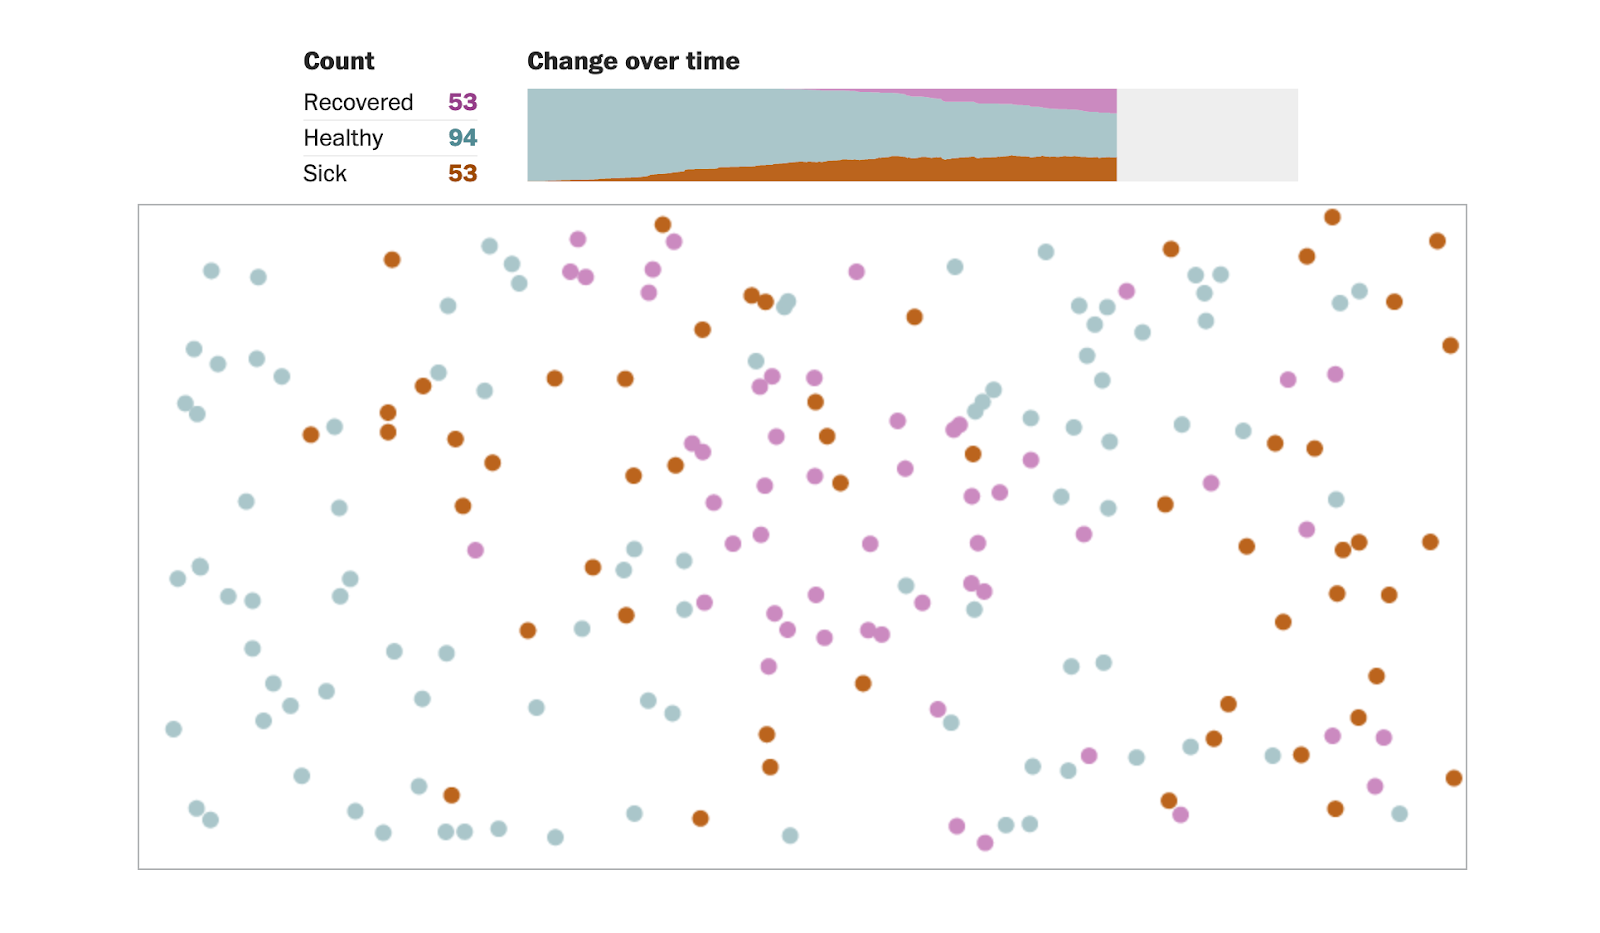 The Washington Post's simulations show how social distancing slows
the spread of COVID-19.